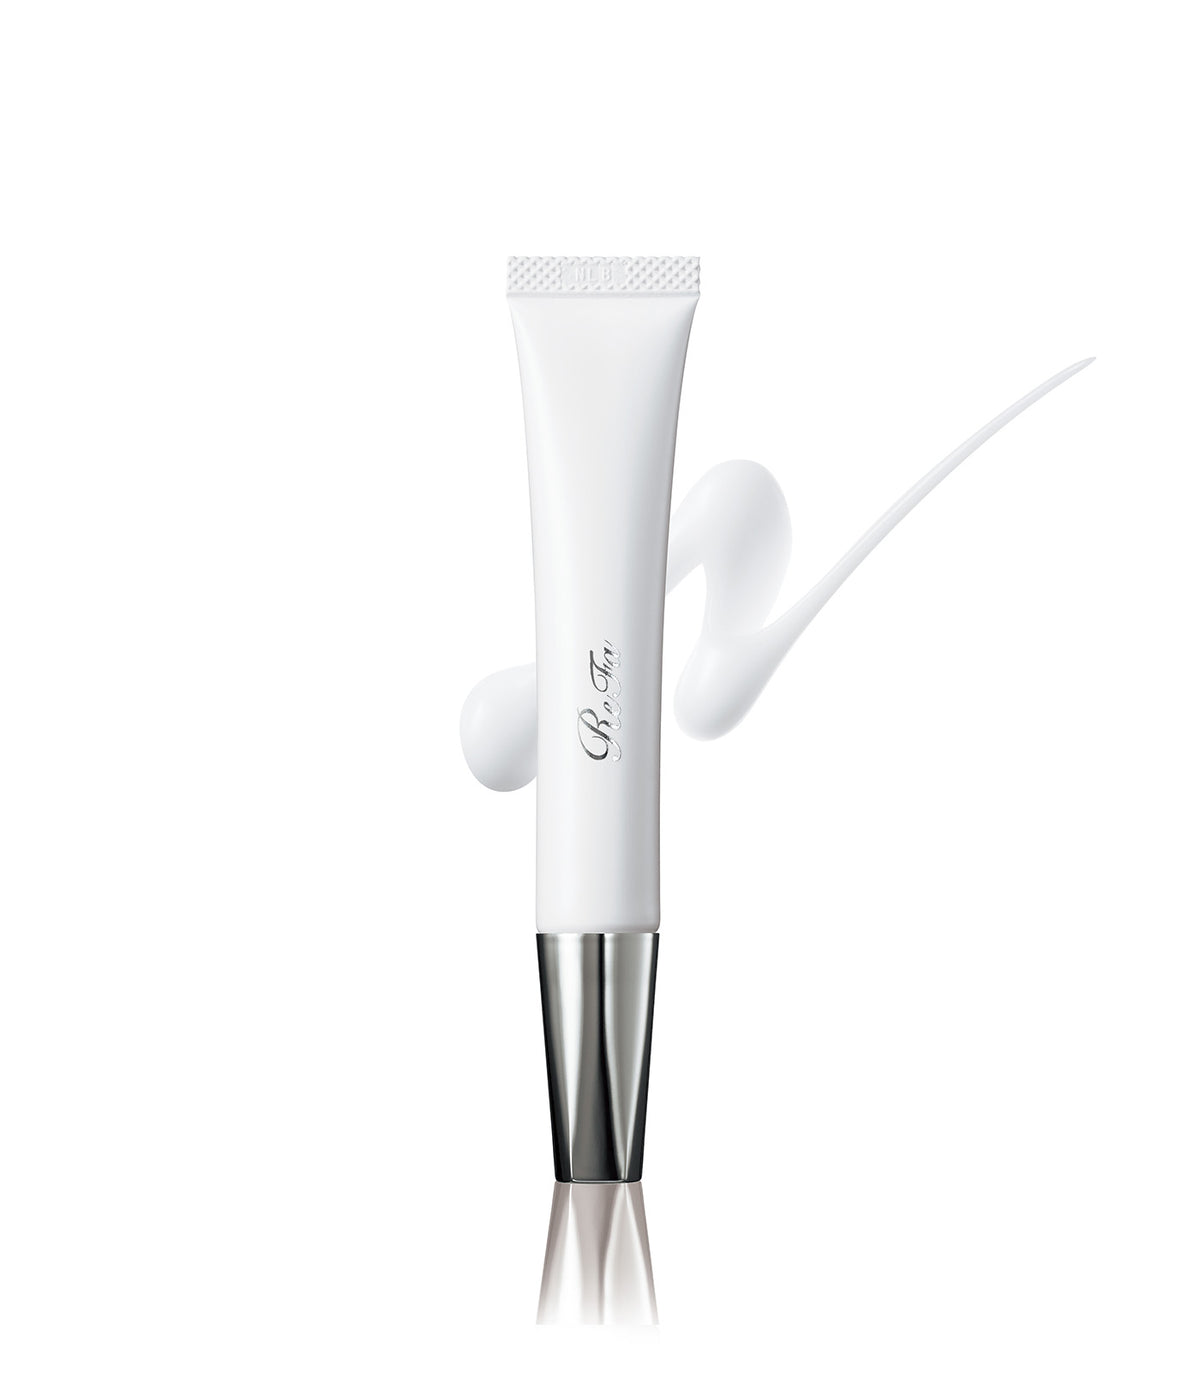 REFA Expression Eye Veil Cream 20 ml [IN-STORE PURCHASE ONLY]